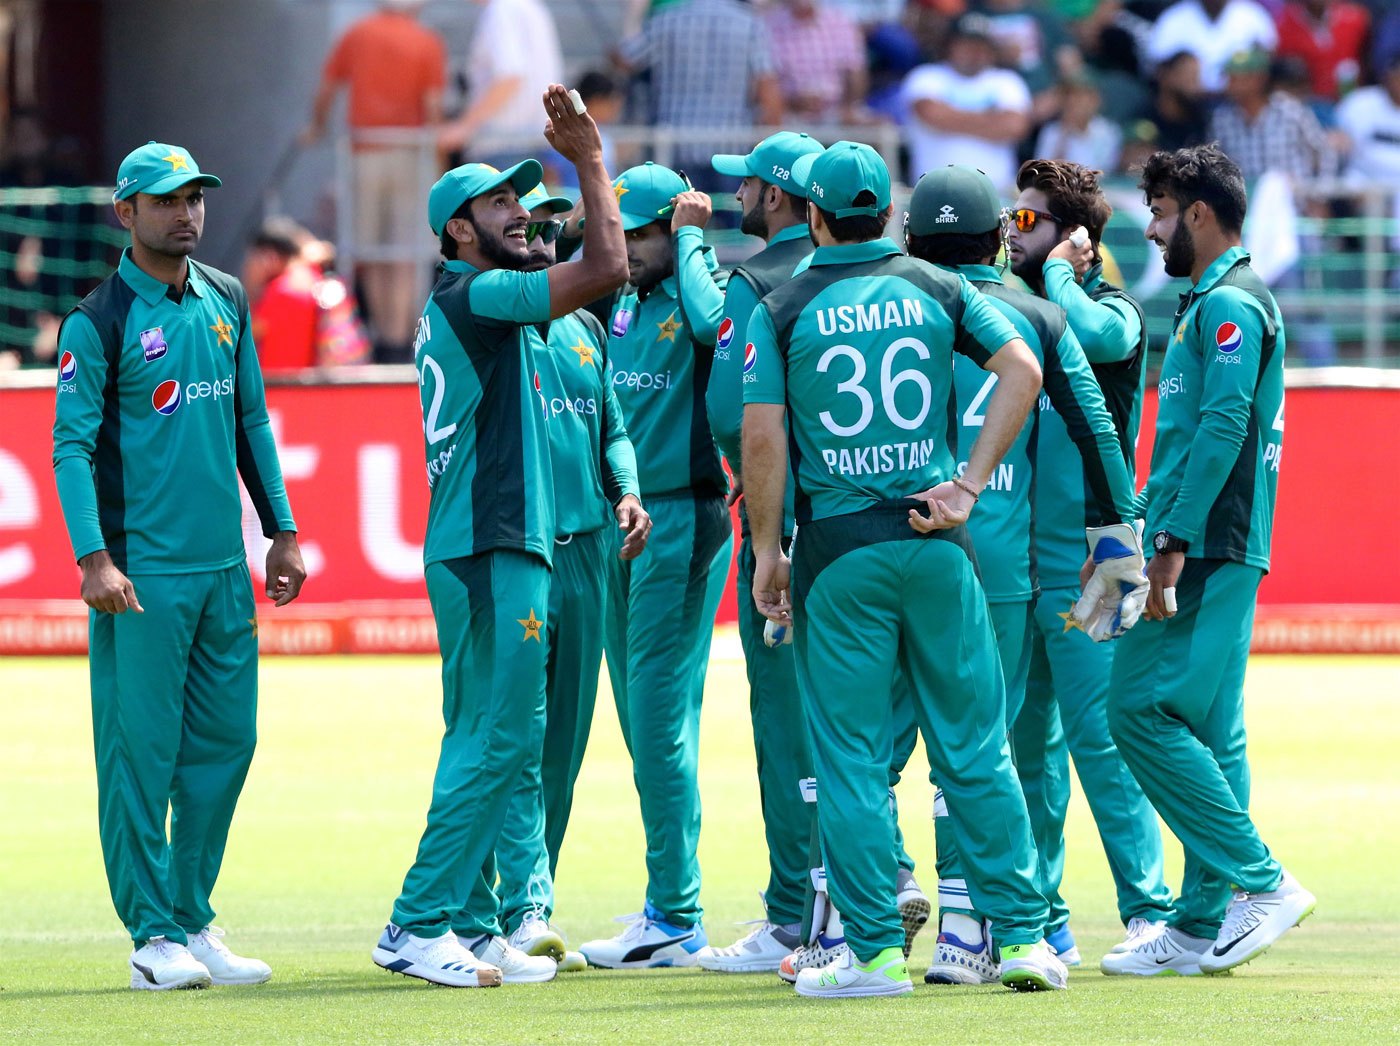 PCB's eyes on organizing some latest series after ICC and ICC have canceled their tournaments